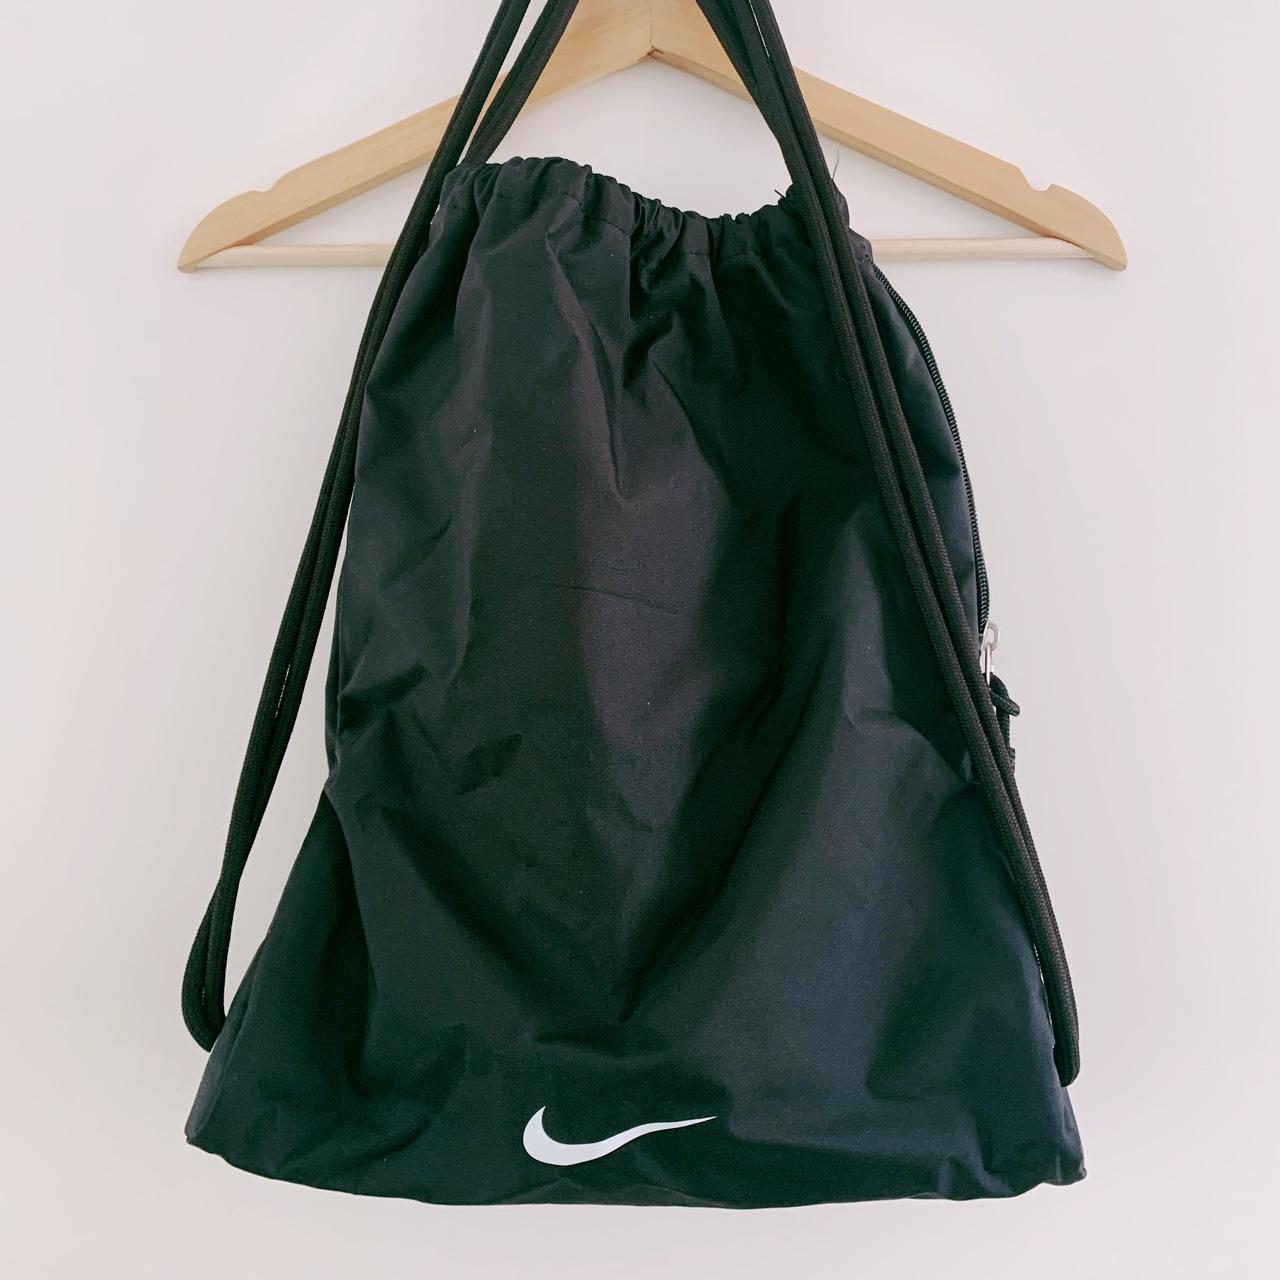 Tote Bag Have A Nike Day – Sneakin